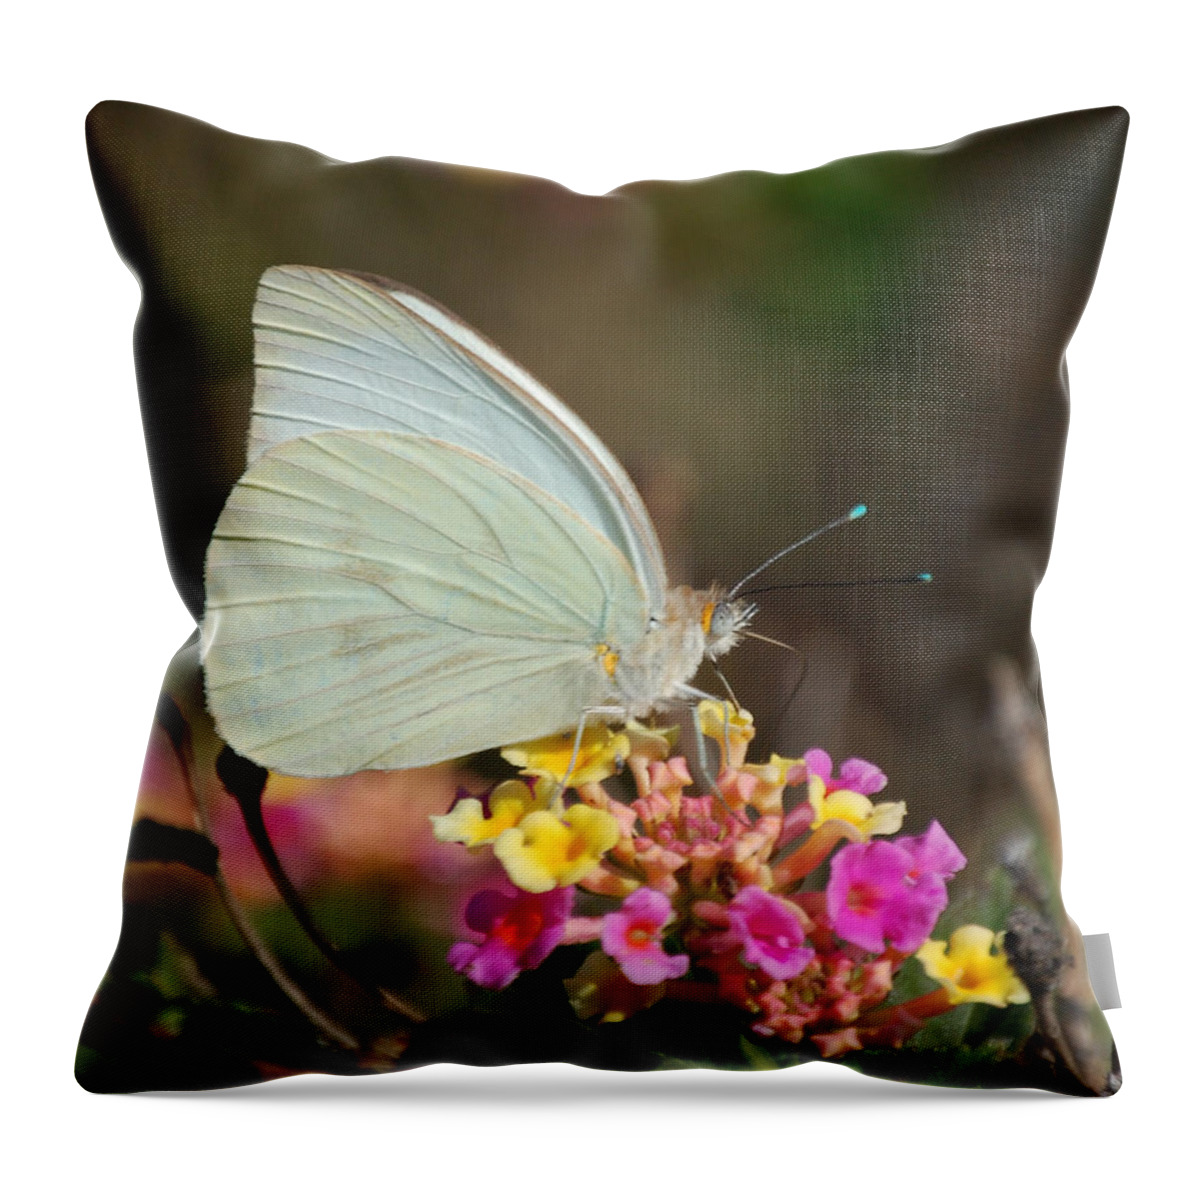 Sitting Throw Pillow featuring the photograph Sitting Pretty by Leticia Latocki